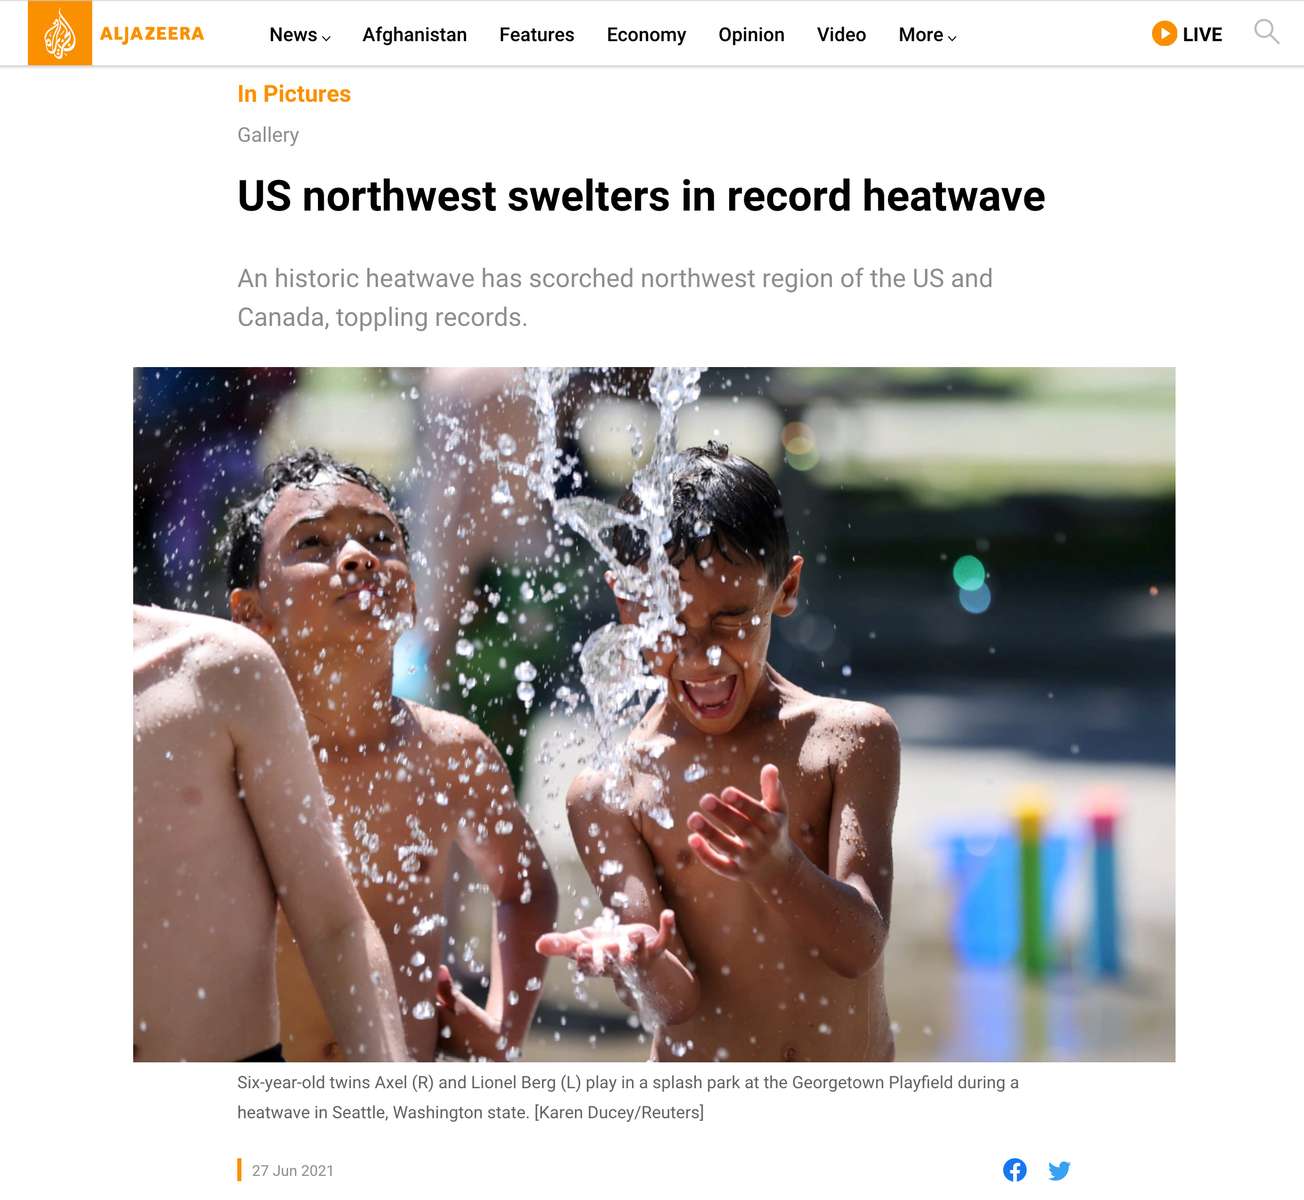 {quote}US northwest swelters in record heatwave{quote} Photos shot for Reuters, published in Aljazeera on June 27, 2021.